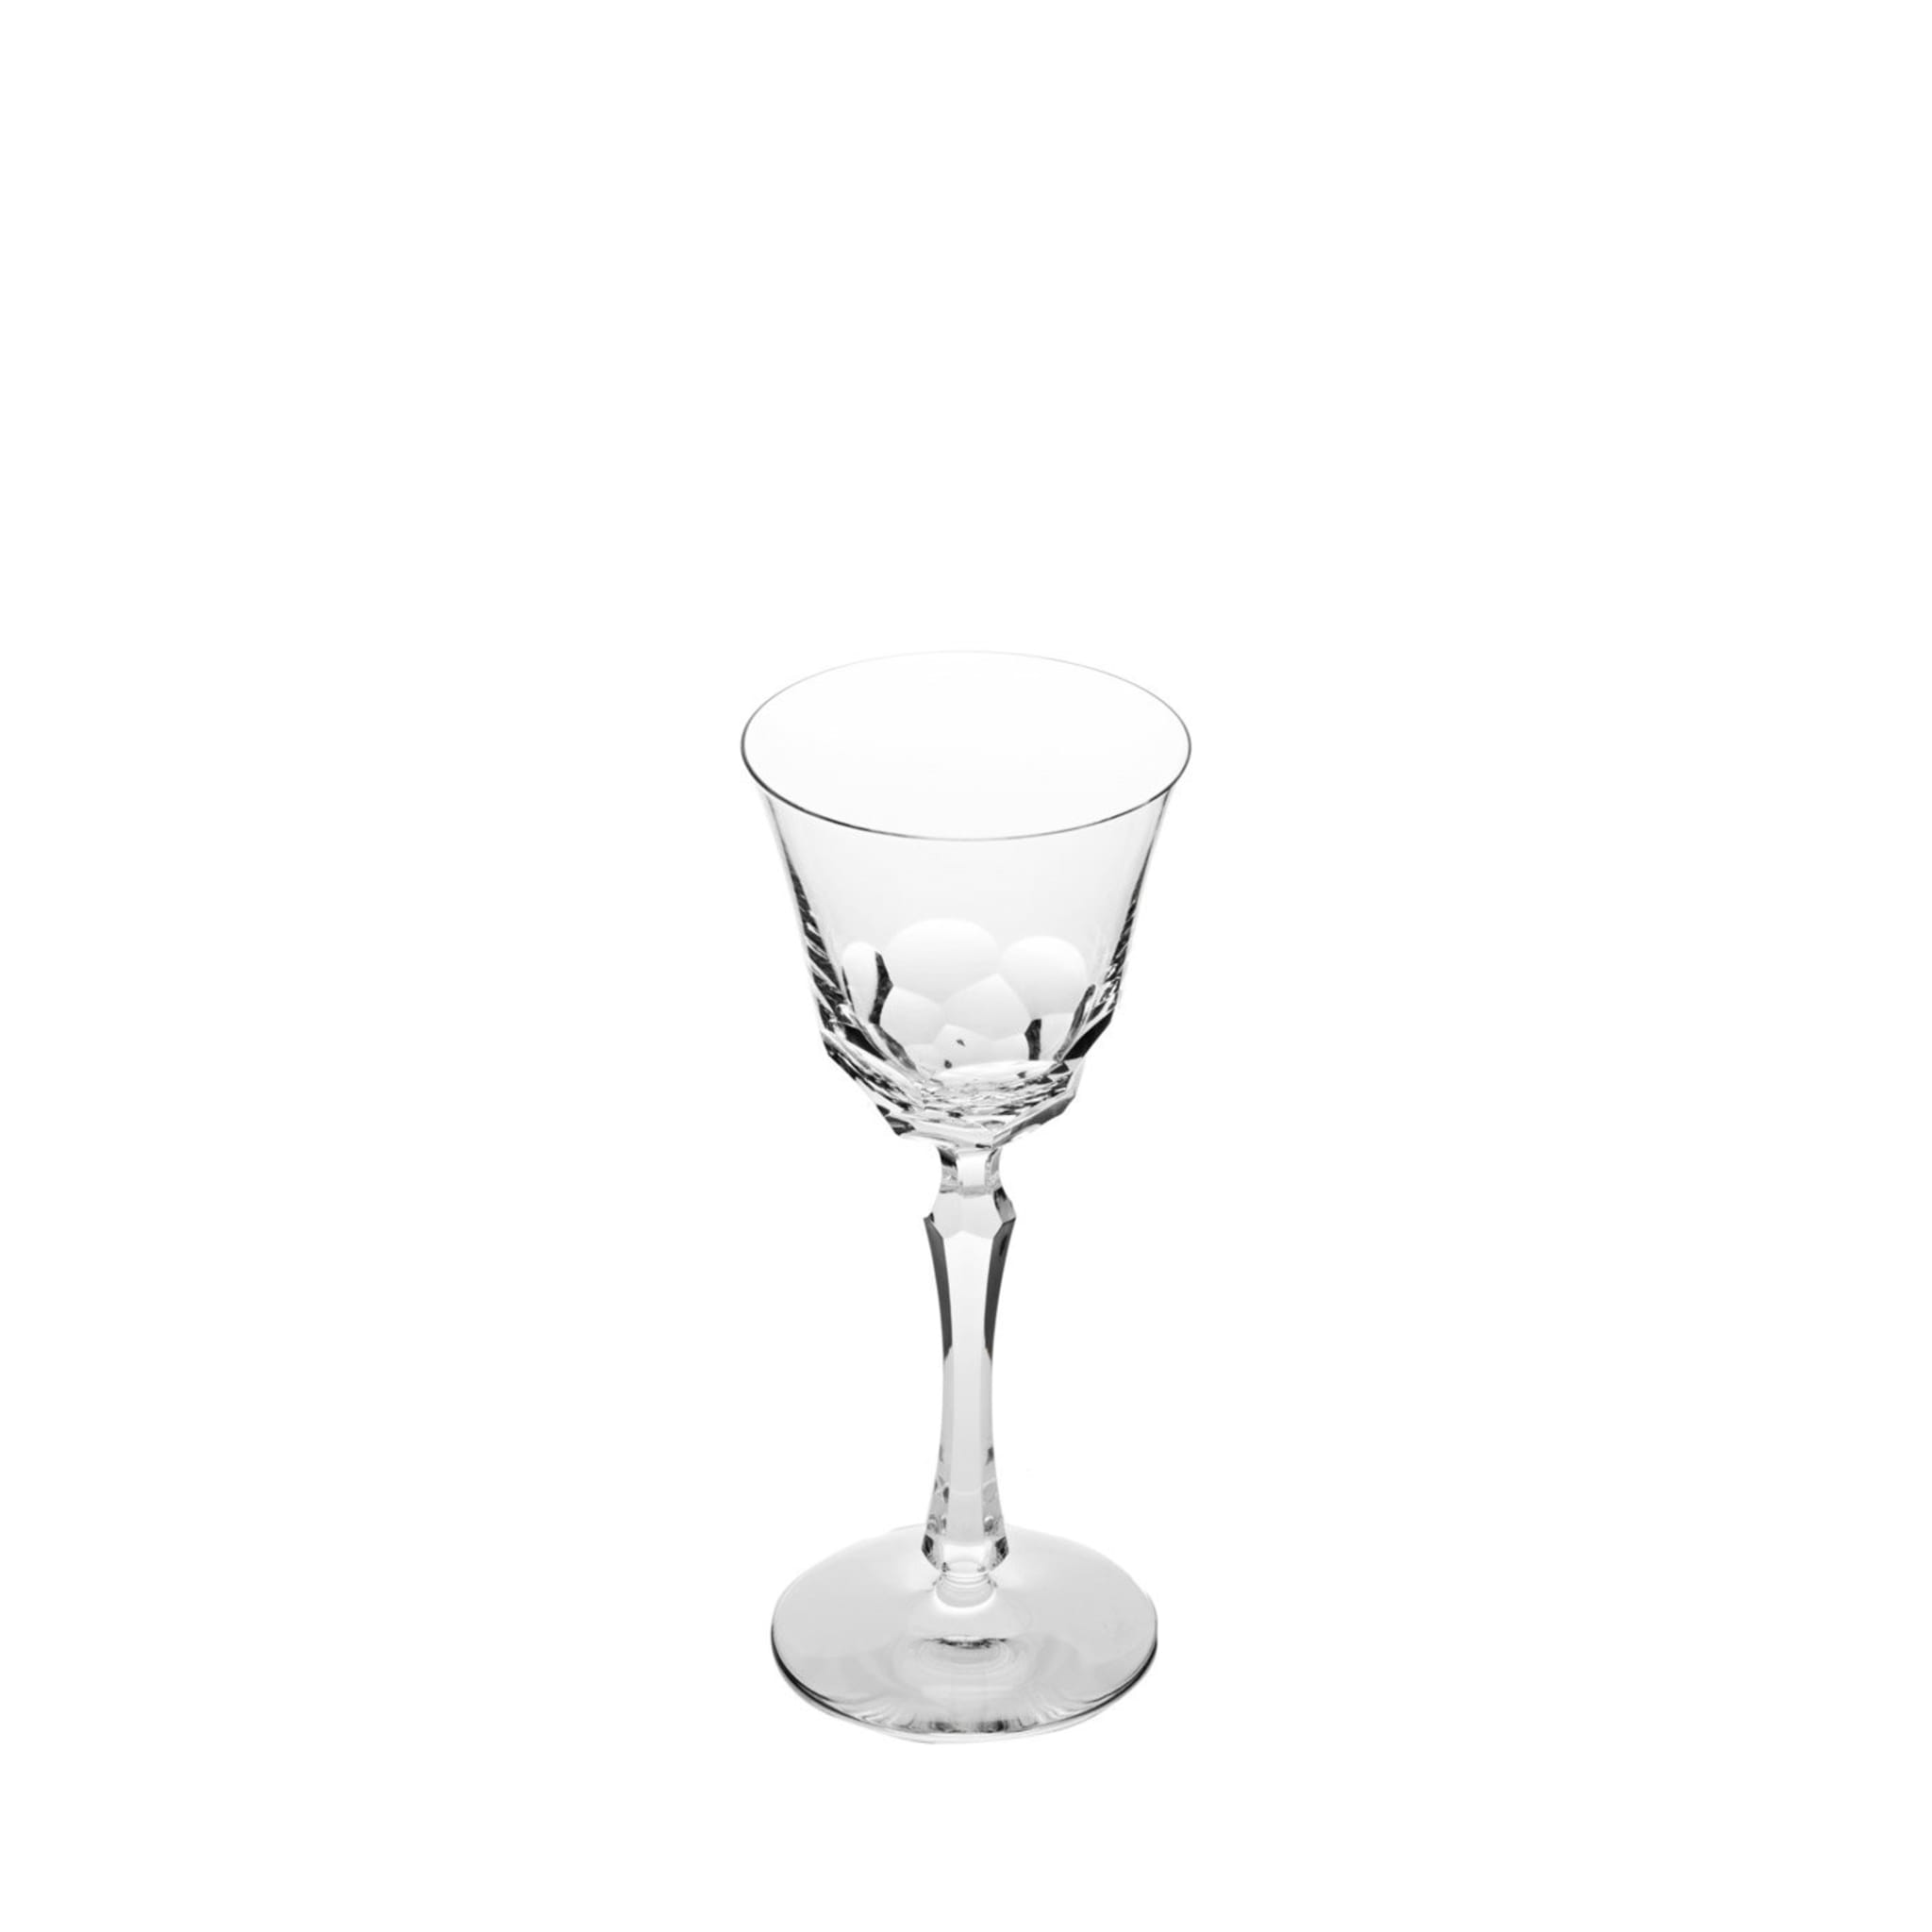 Set of 6 Narciso Crystal Wine Glasses - Alternative view 1